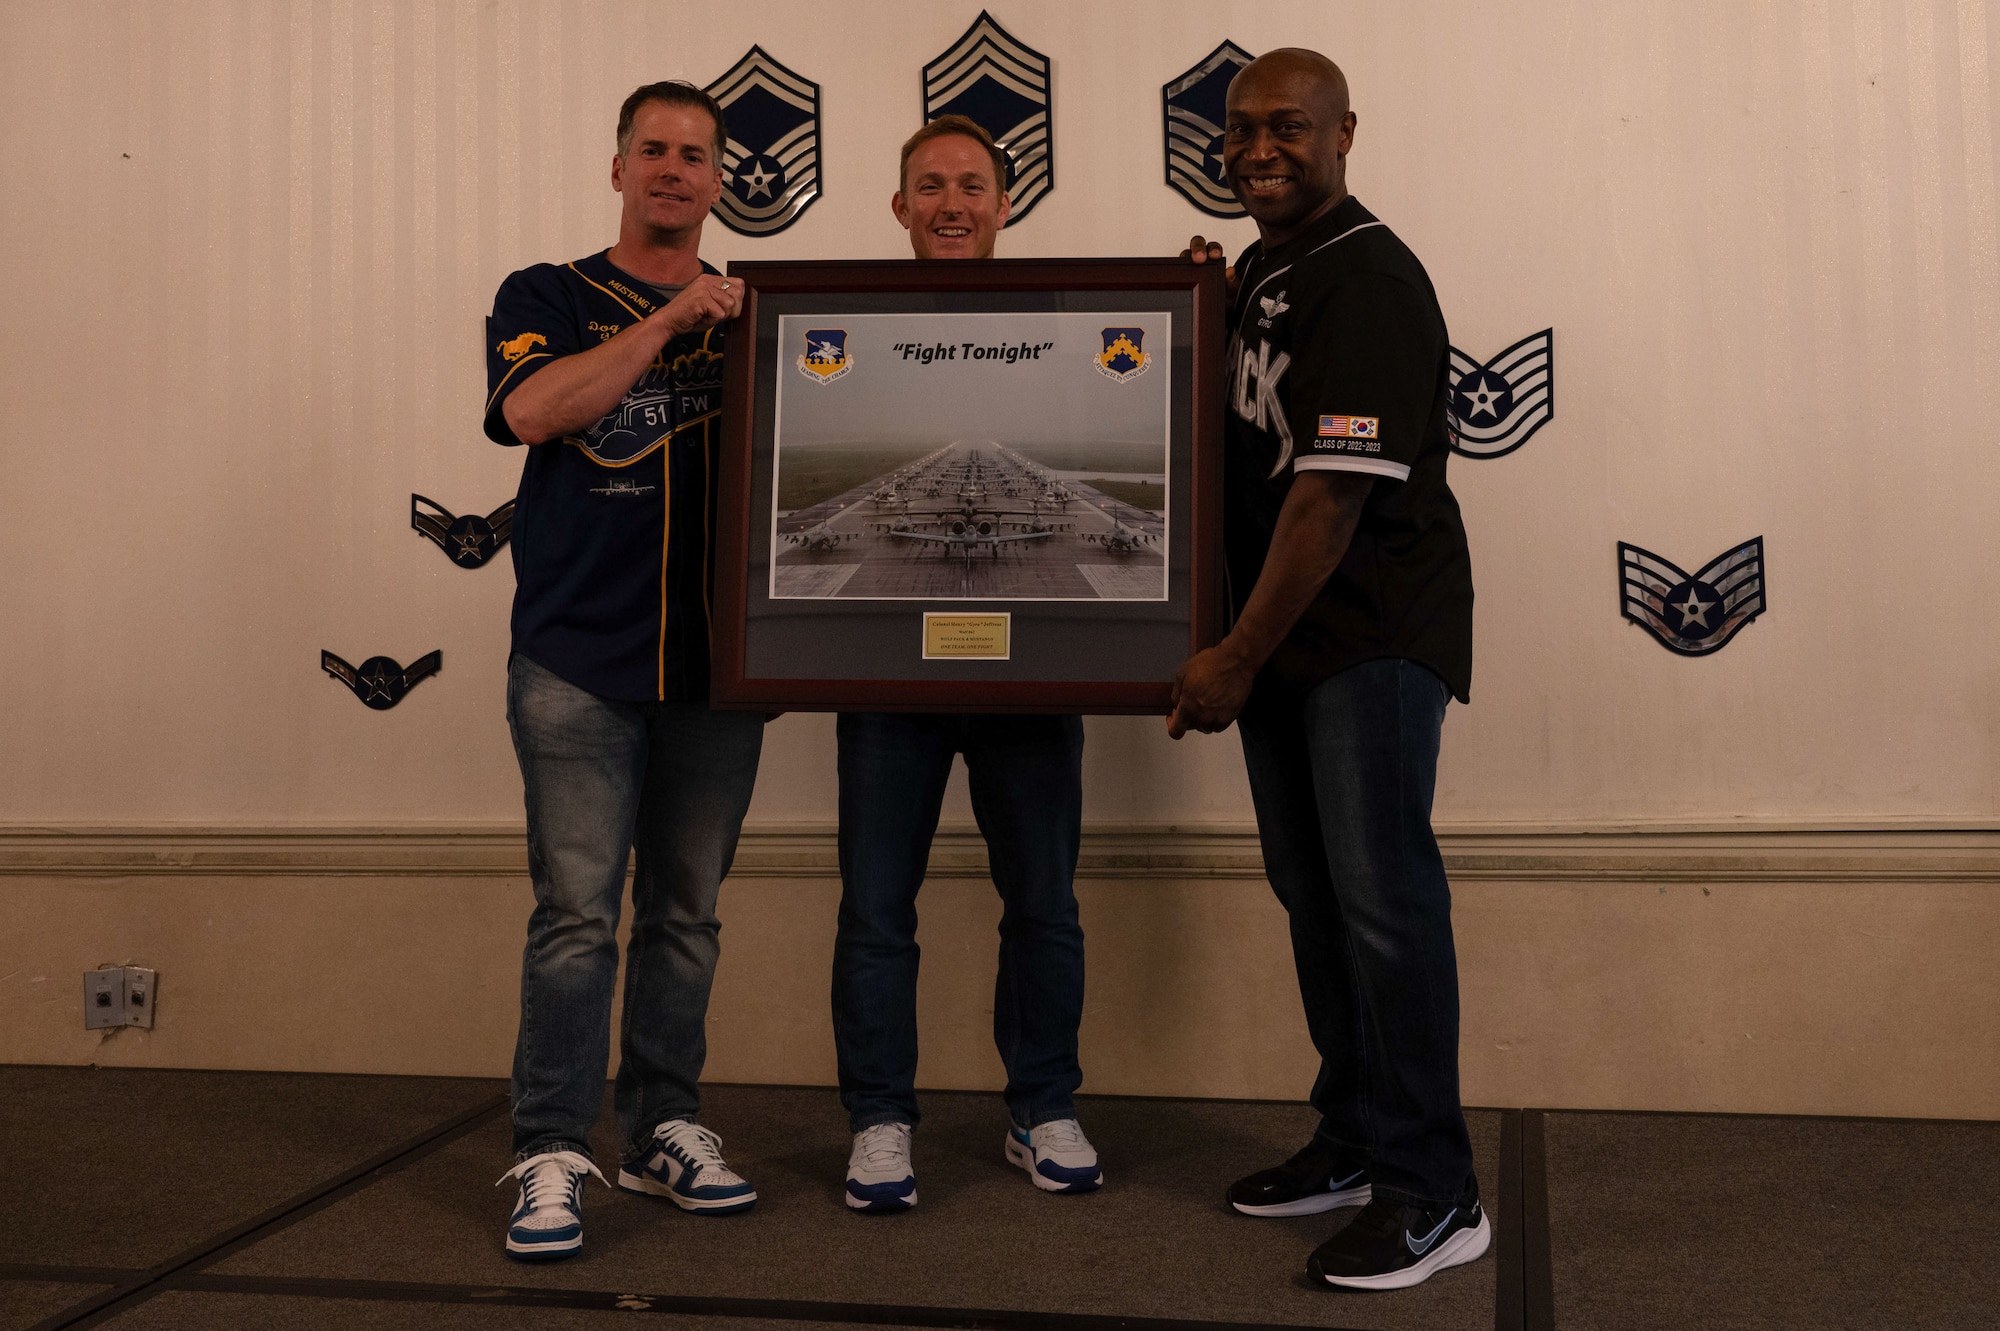 Col. Henry R. Jeffress, right, 8th Fighter Wing commander, poses with Col. Joshua Wood, 51 FW commander, left, and Col. Paul Davidson, 51 FW vice commander during a going away ceremony at Kunsan Air Base, Republic of Korea, May 23, 2023. Before serving as the 8 FW commander, Jeffress served as the 51 FW vice commander at Osan Air Base. (U.S. Air Force photo by Tech. Sgt. Timothy Dischinat)